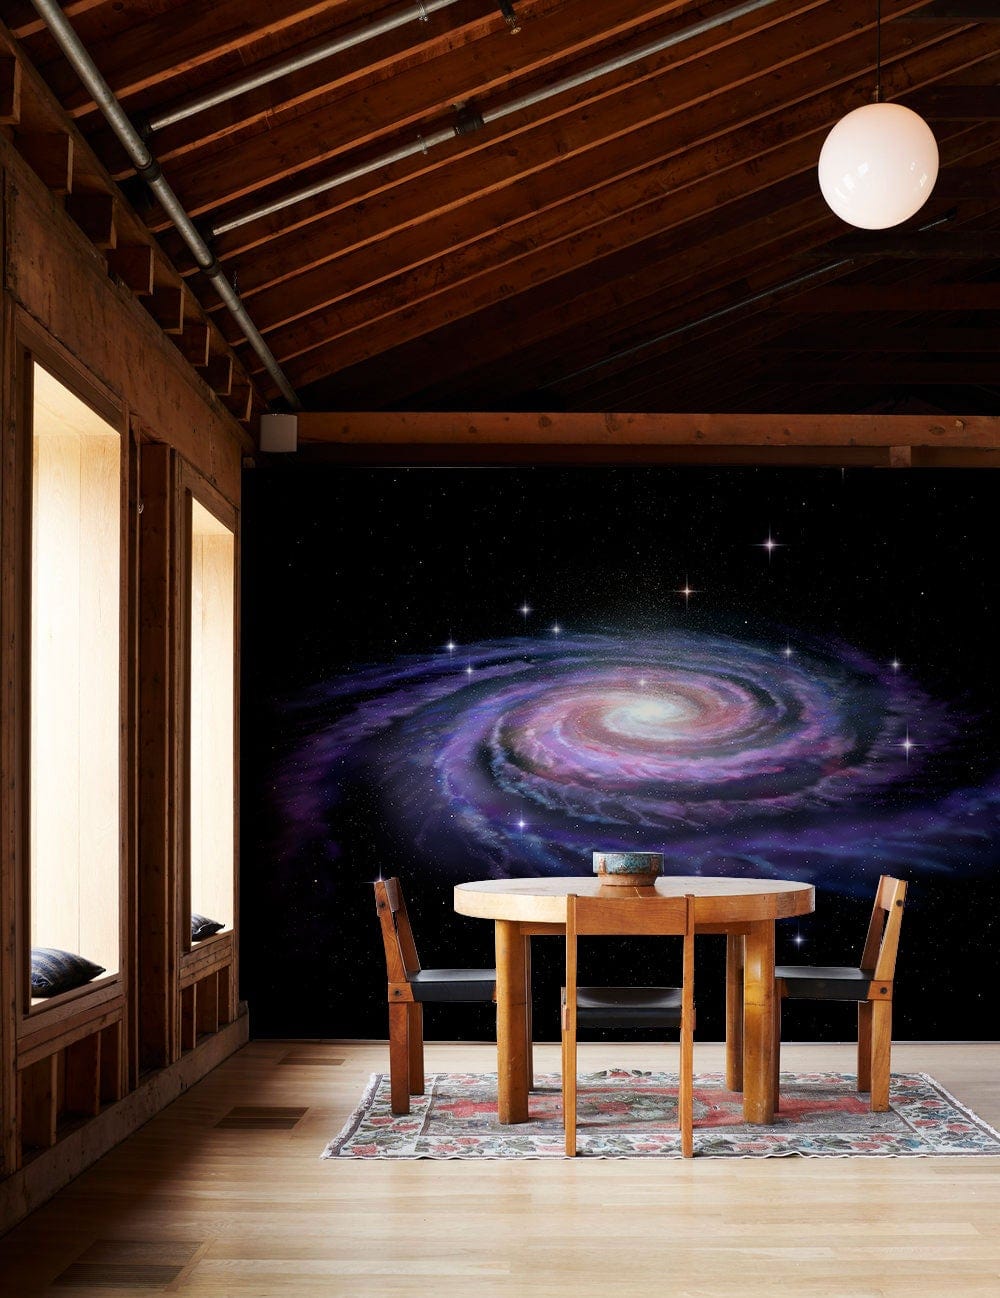 mysterious galactics Wallpaper mural for dining room decor